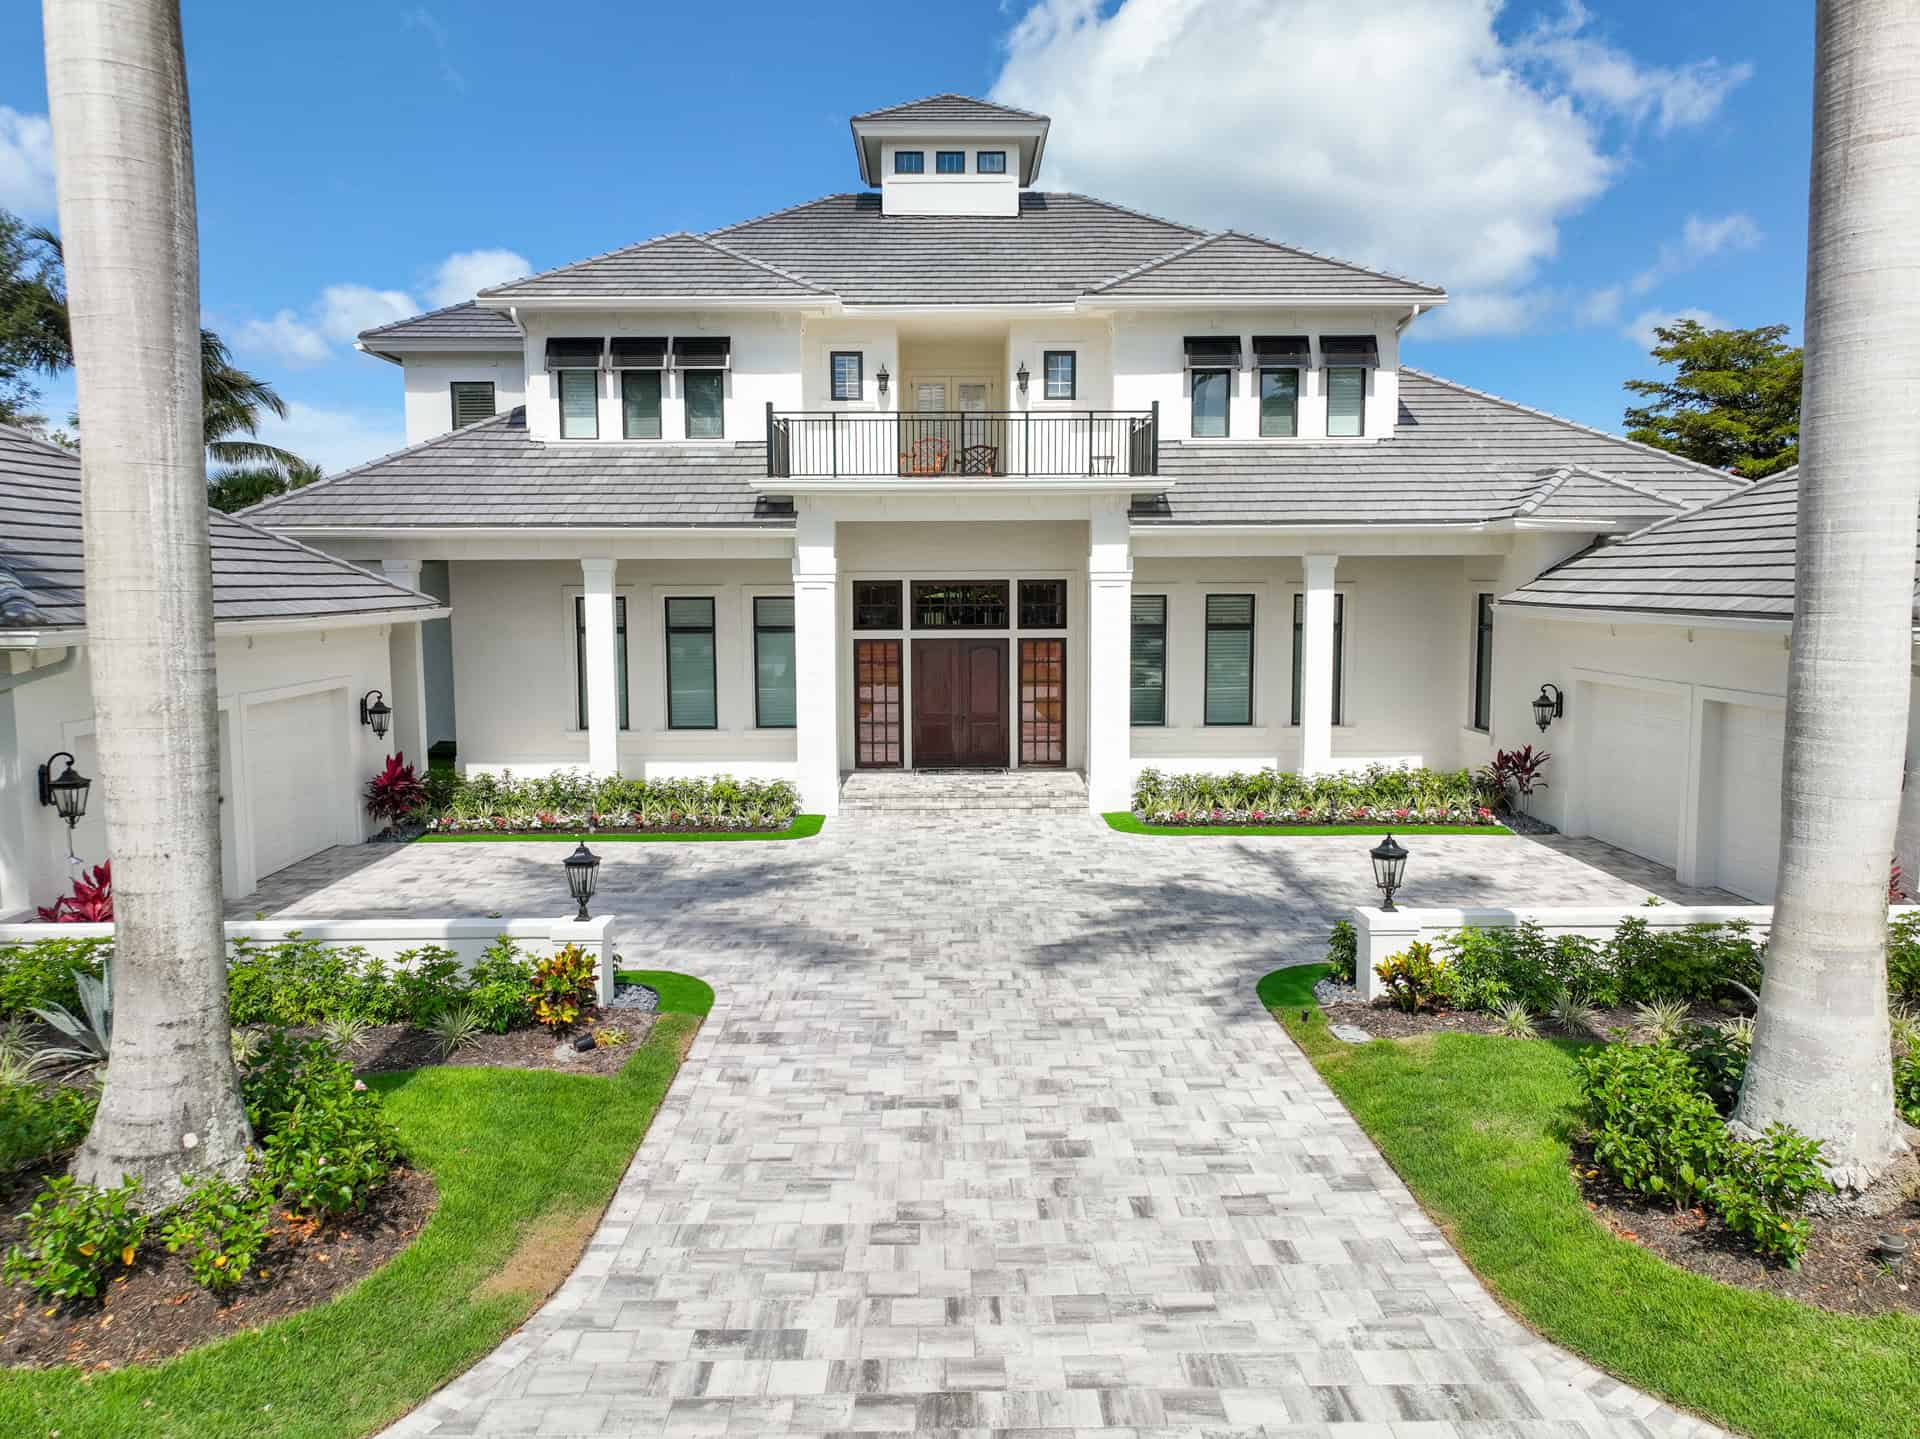 residential paver driveway by accurate pavers